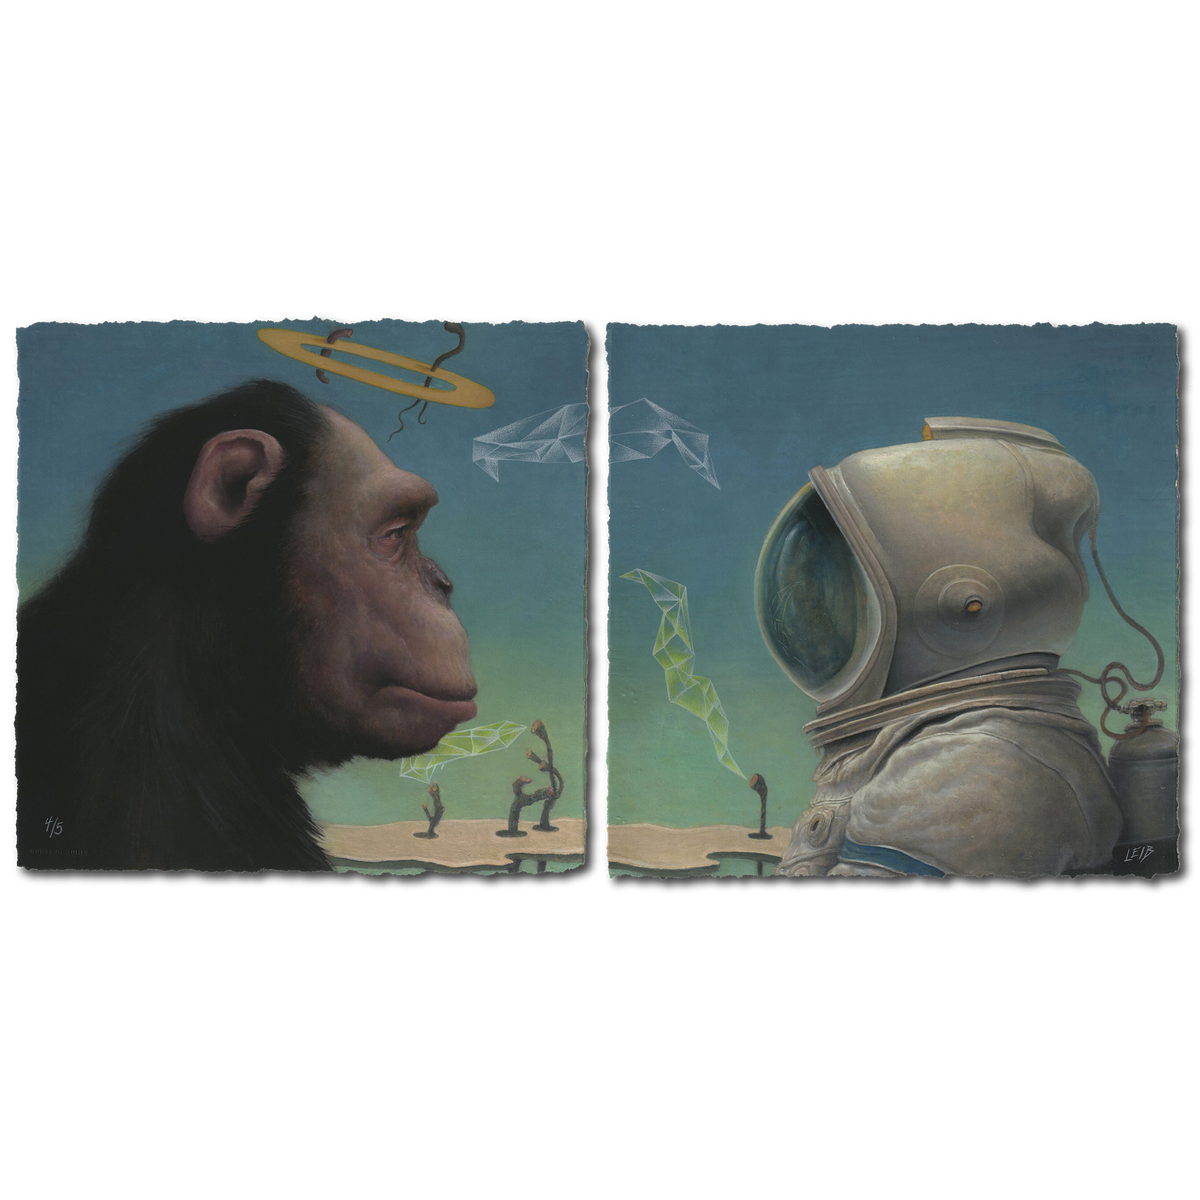 Chris Leib &quot;Uncommon Agreement&quot; - Hand-Embellished Diptych Edition #4/5 - 17 x 17&quot; Each